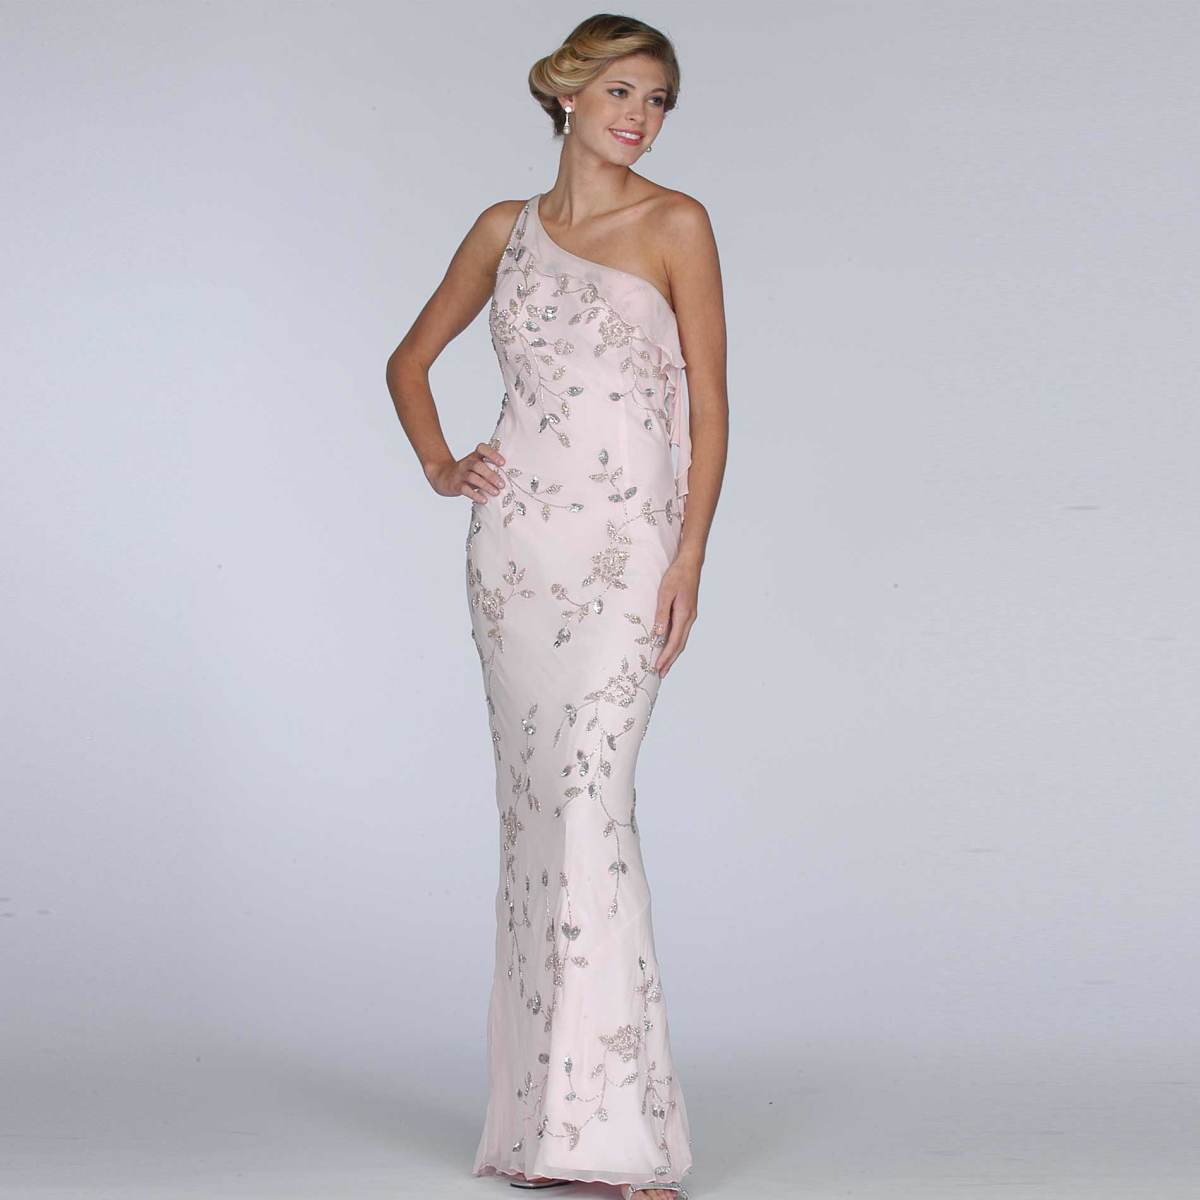 photo credit: sears.com   Formal Gallery silk formal evening gown, pink prom dress (8341), on sale for $109, reg price= $179. Available in sizes extra small to medium 